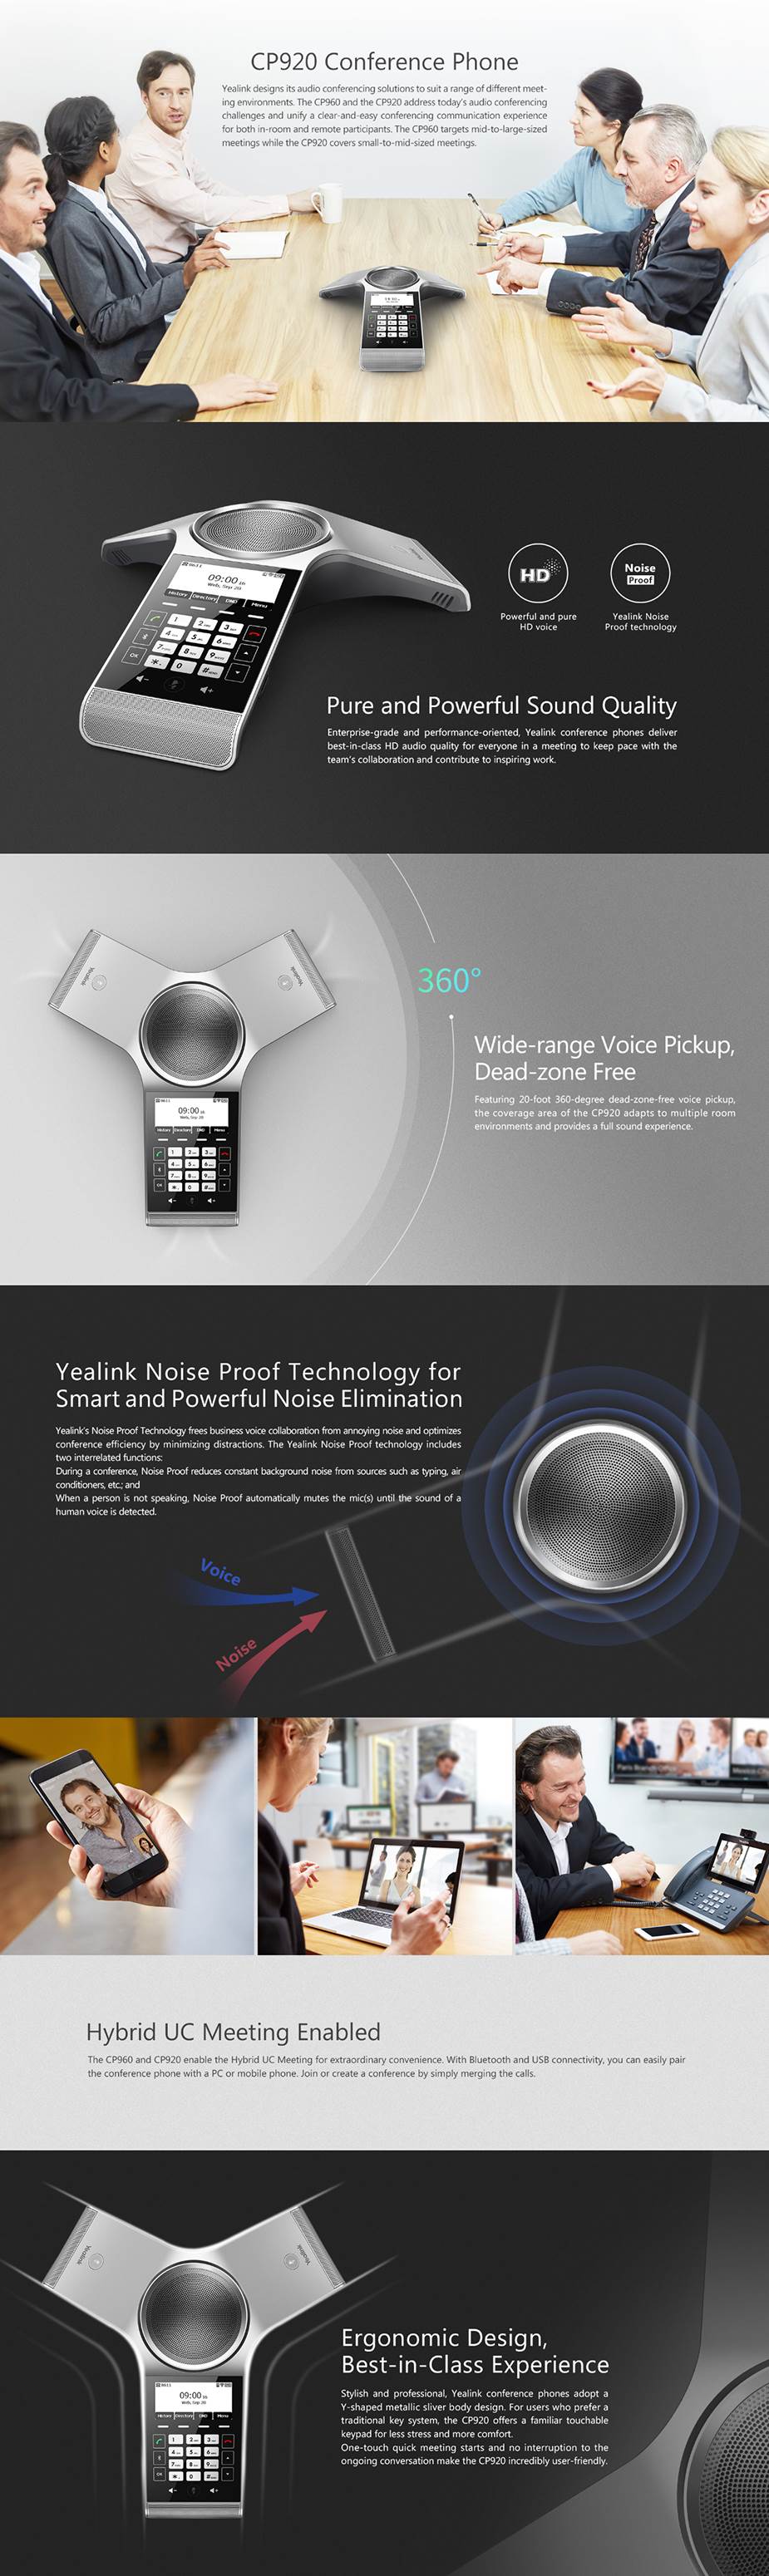 Yealink CP920 Touch-sensitive HD IP Conference Phone Details